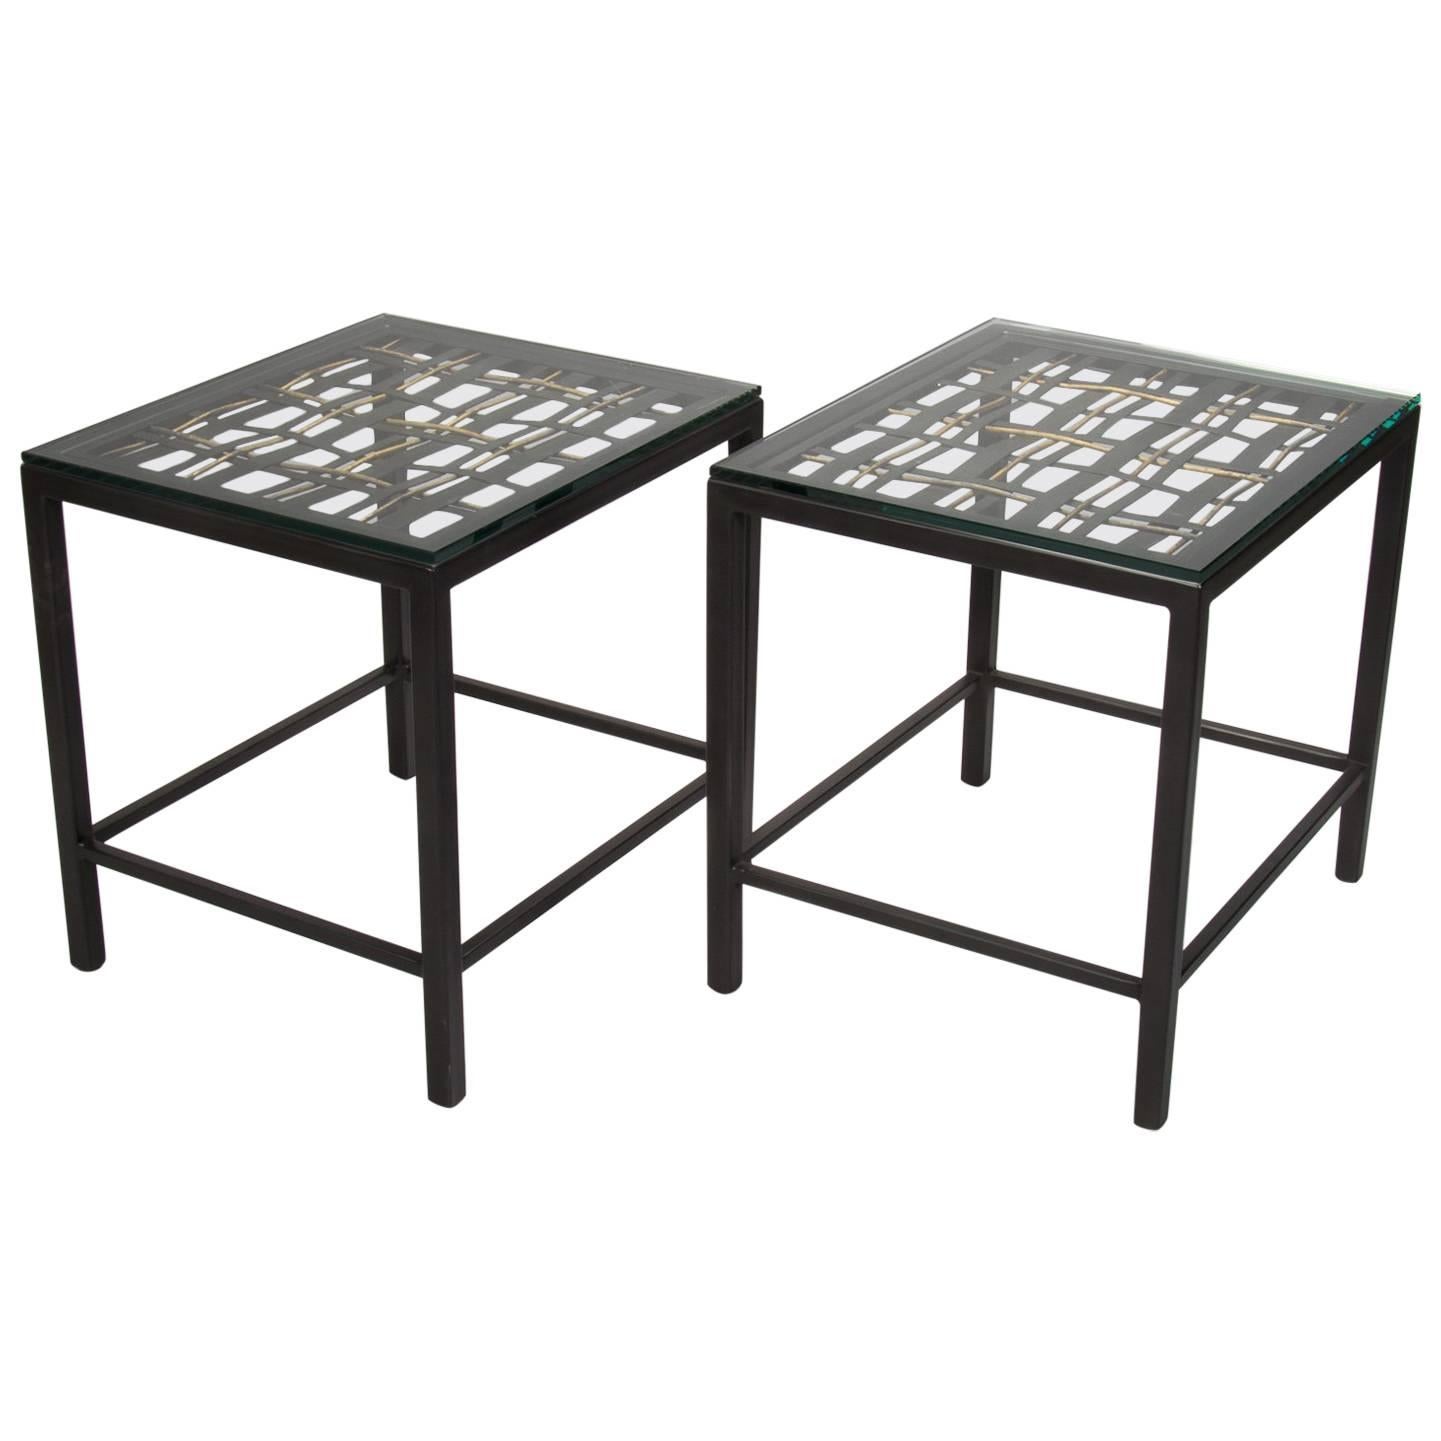 Pair of Custom End Tables Made with Decorative French Grill